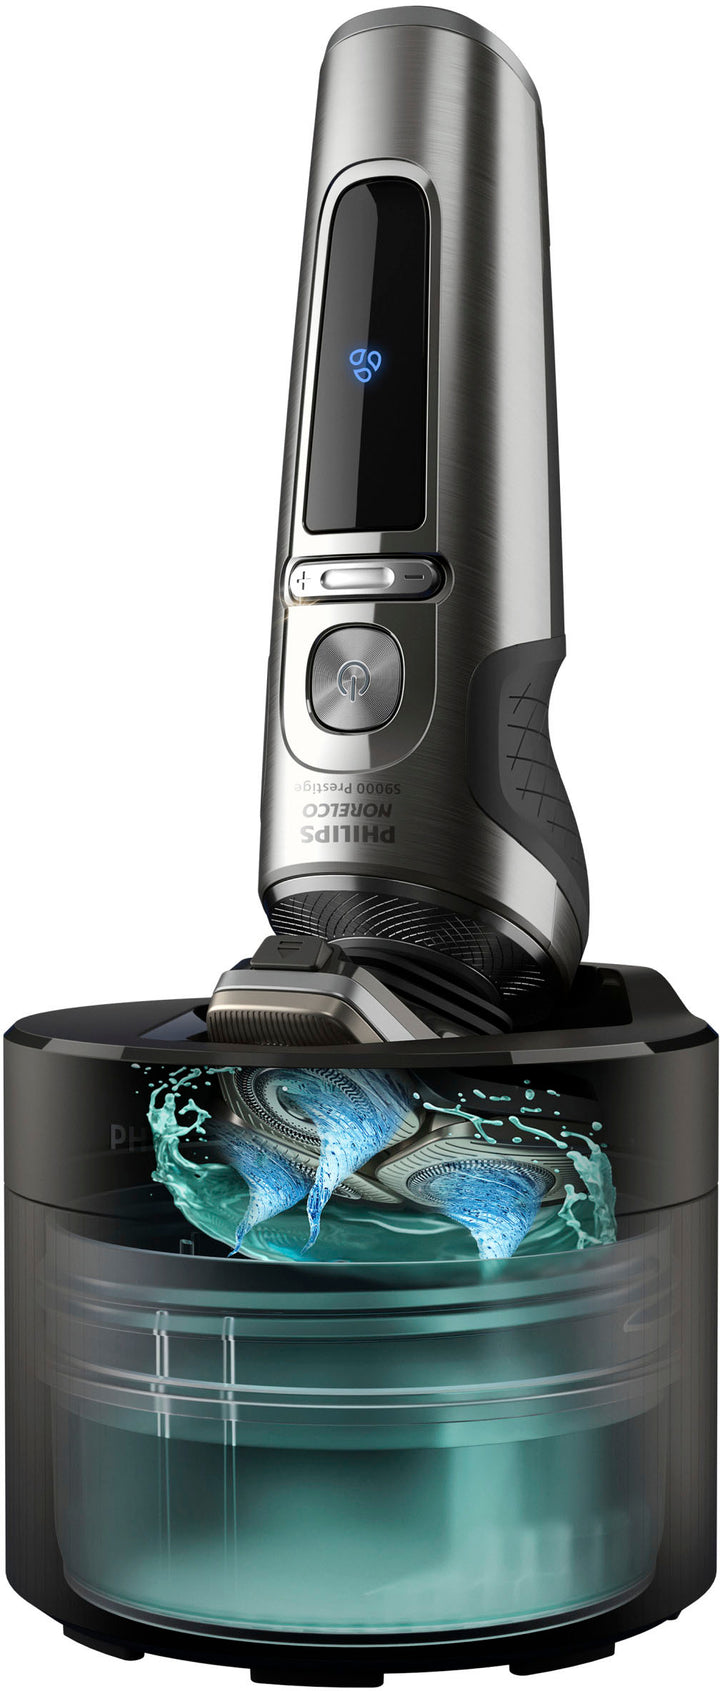 Philips Norelco S9000 Prestige Rechargeable Wet & Dry Shaver with Precision Trimmer and Premium Case, SP9841/84 - Light Brushed Chrome_5